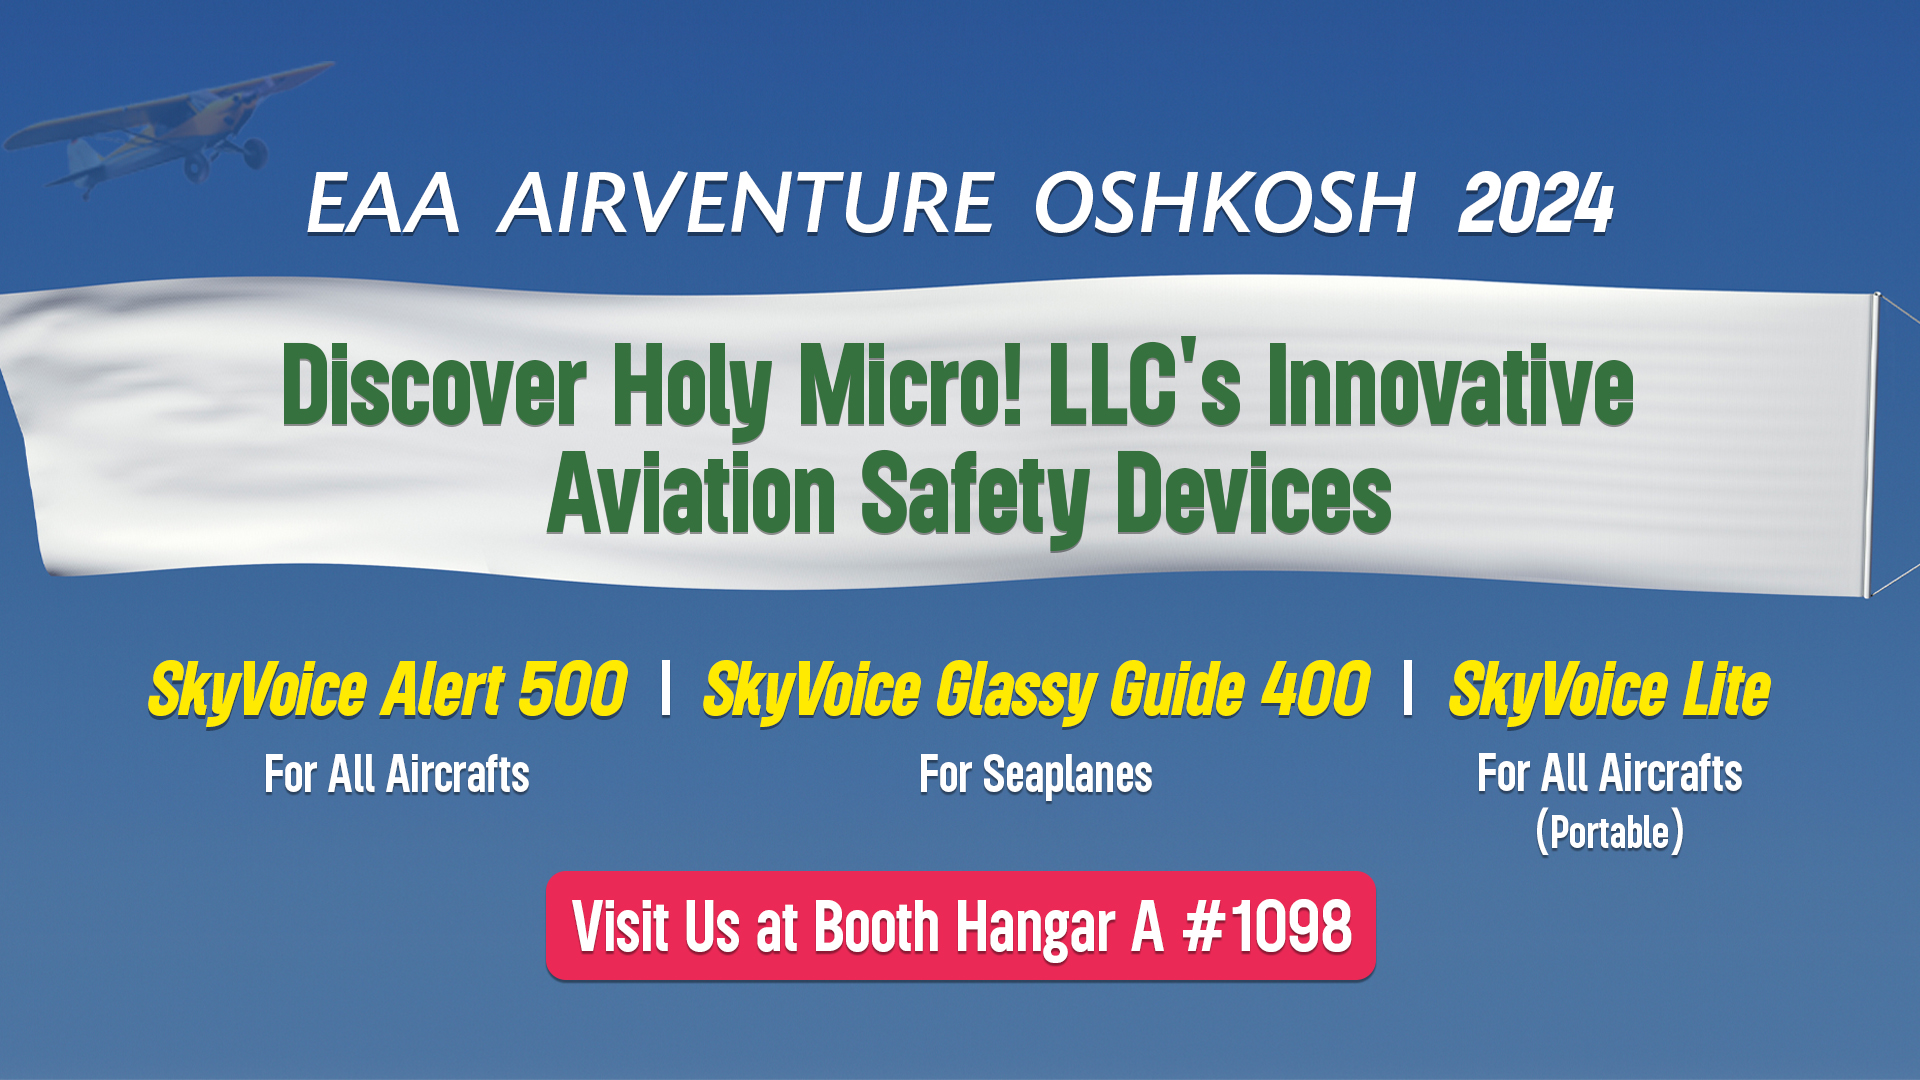 EAA AirVenture Oshkosh 2024: Discover Holy Micro! LLC’s Innovative Aviation Safety Devices